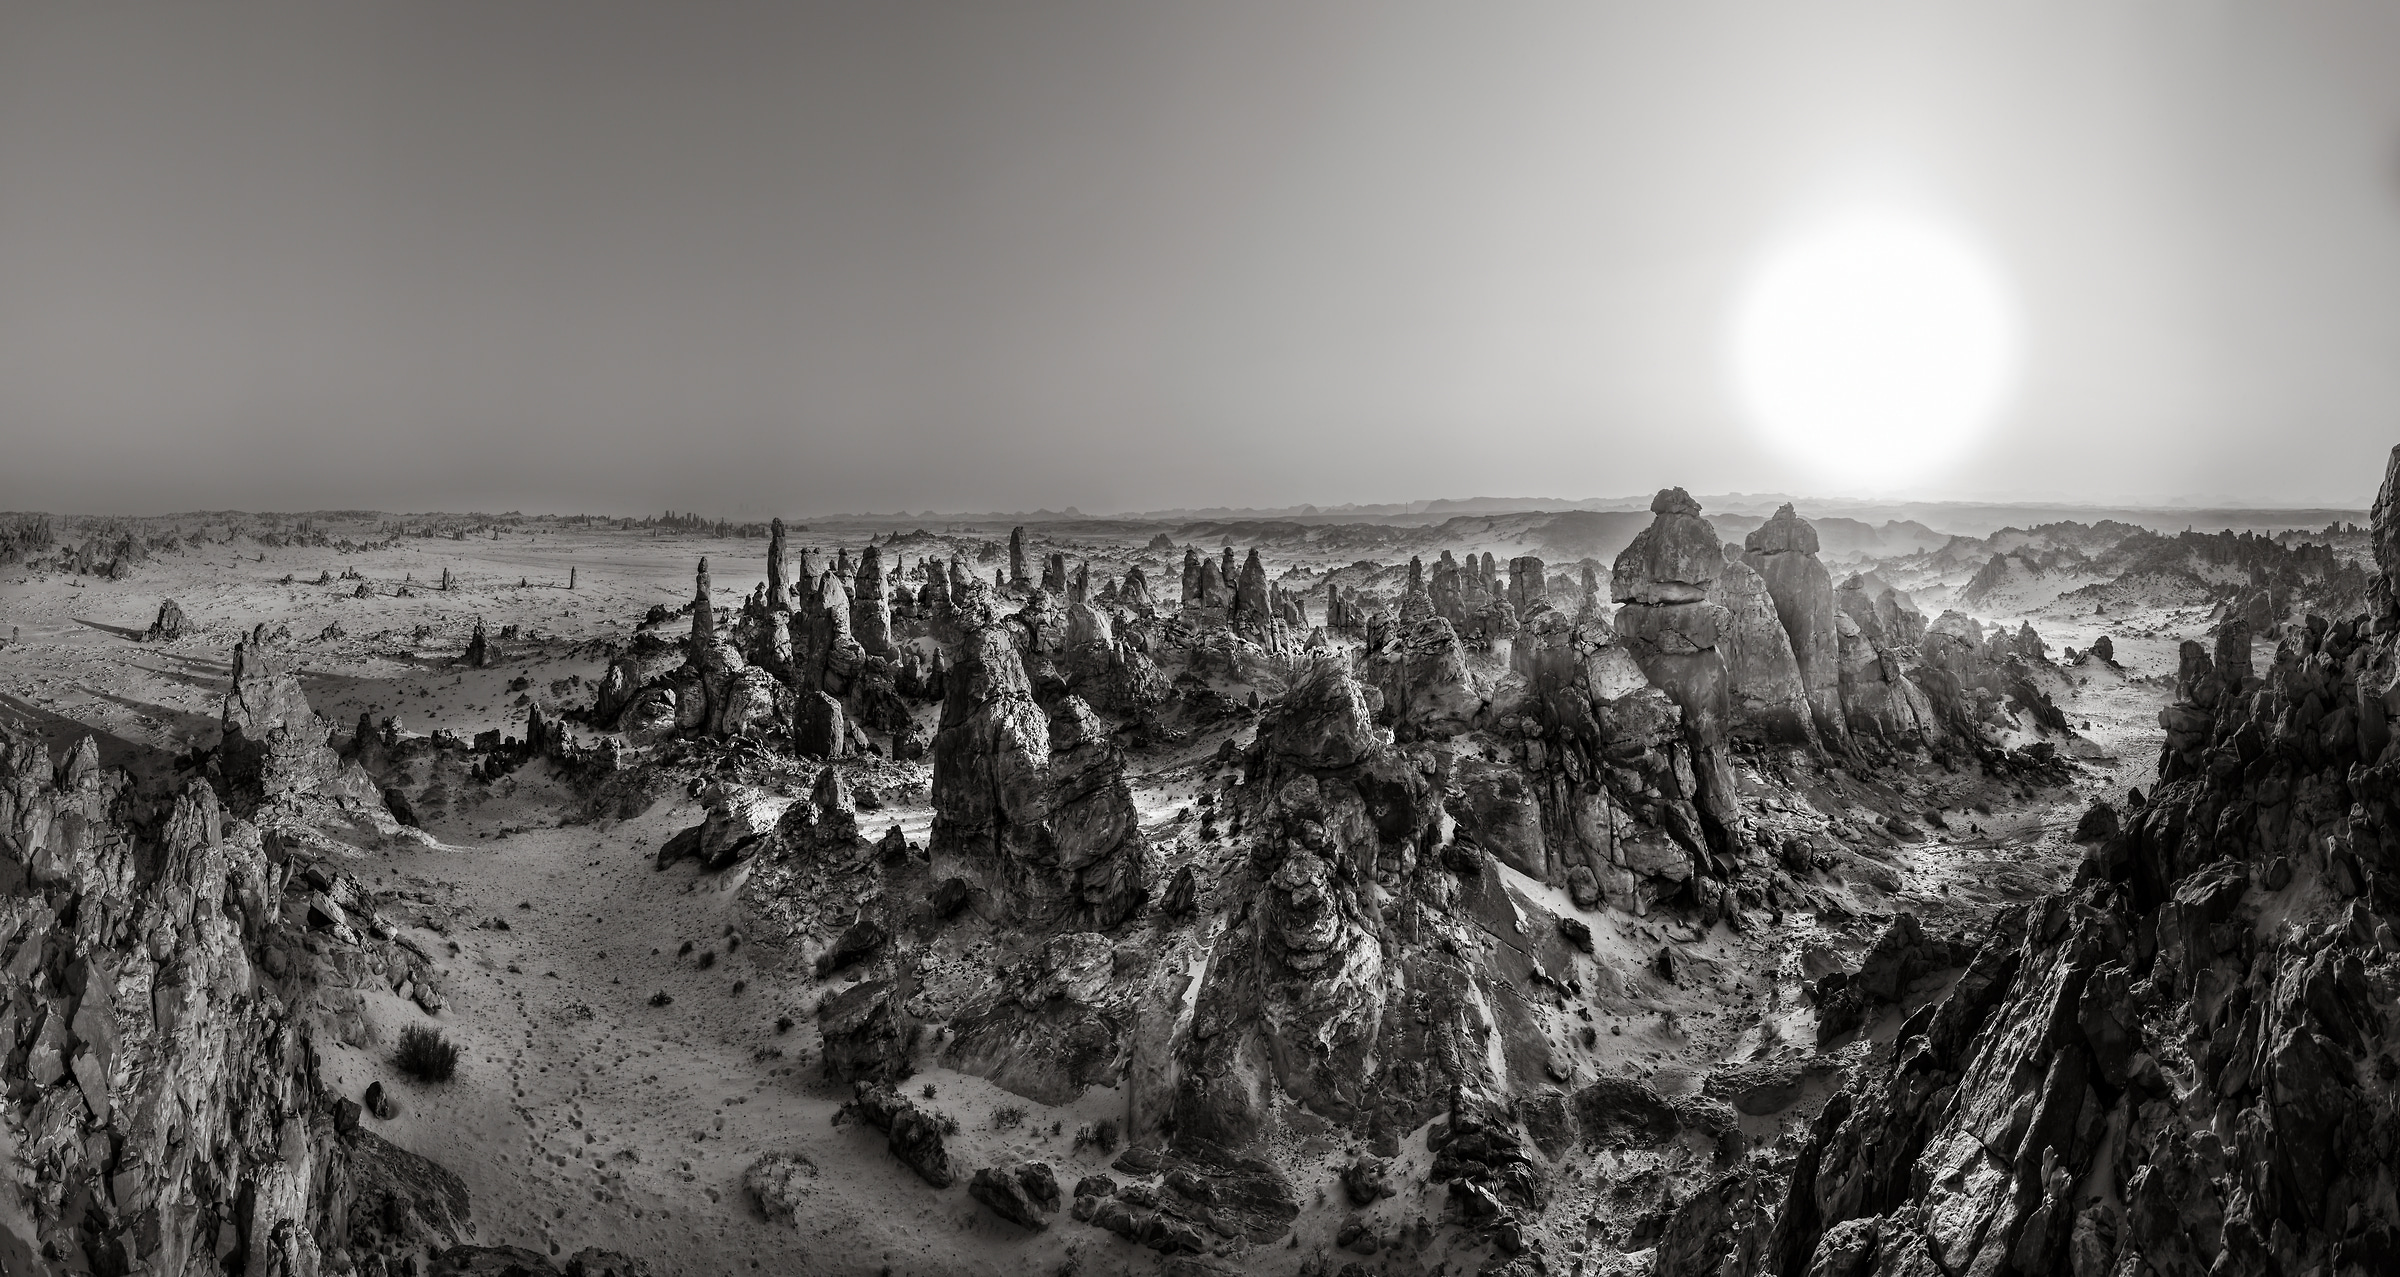 306 megapixels! A very high resolution, large-format VAST photo print of a desolate desert landscape in black and white; fine art landscape photograph created by Peter Rodger in Al Ula, Saudi Arabia.